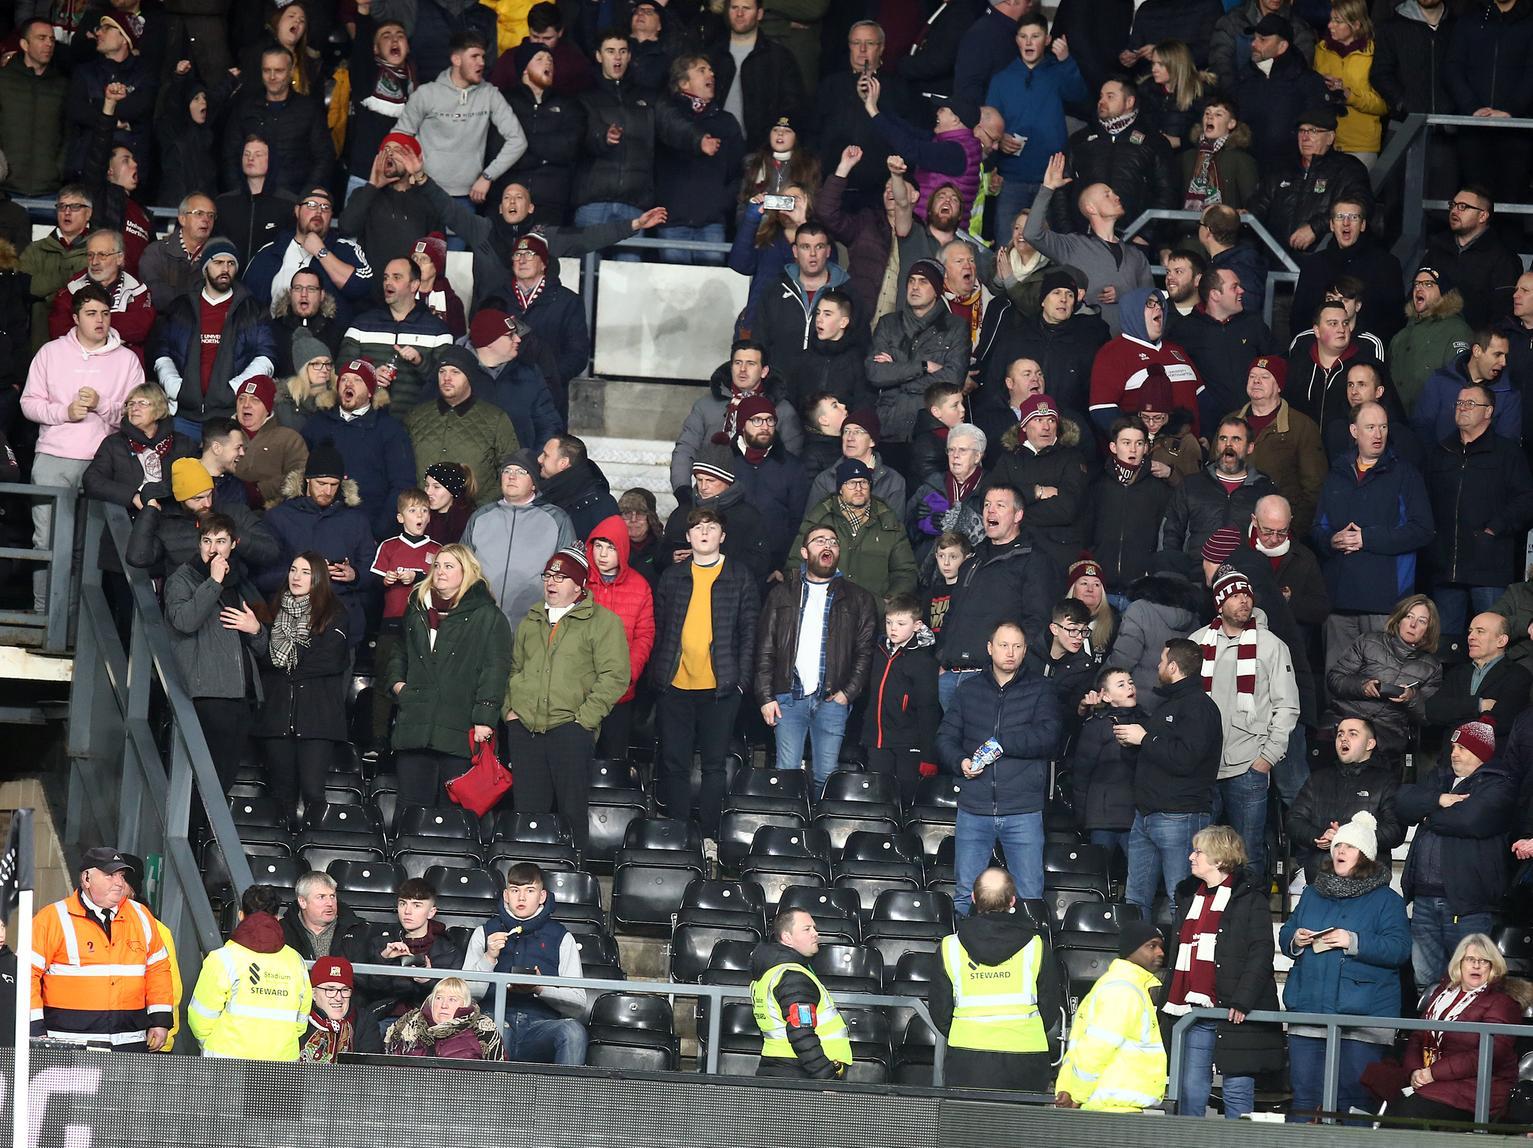 The Cobblers may have lost, but they enjoyed an excellent FA Cup run